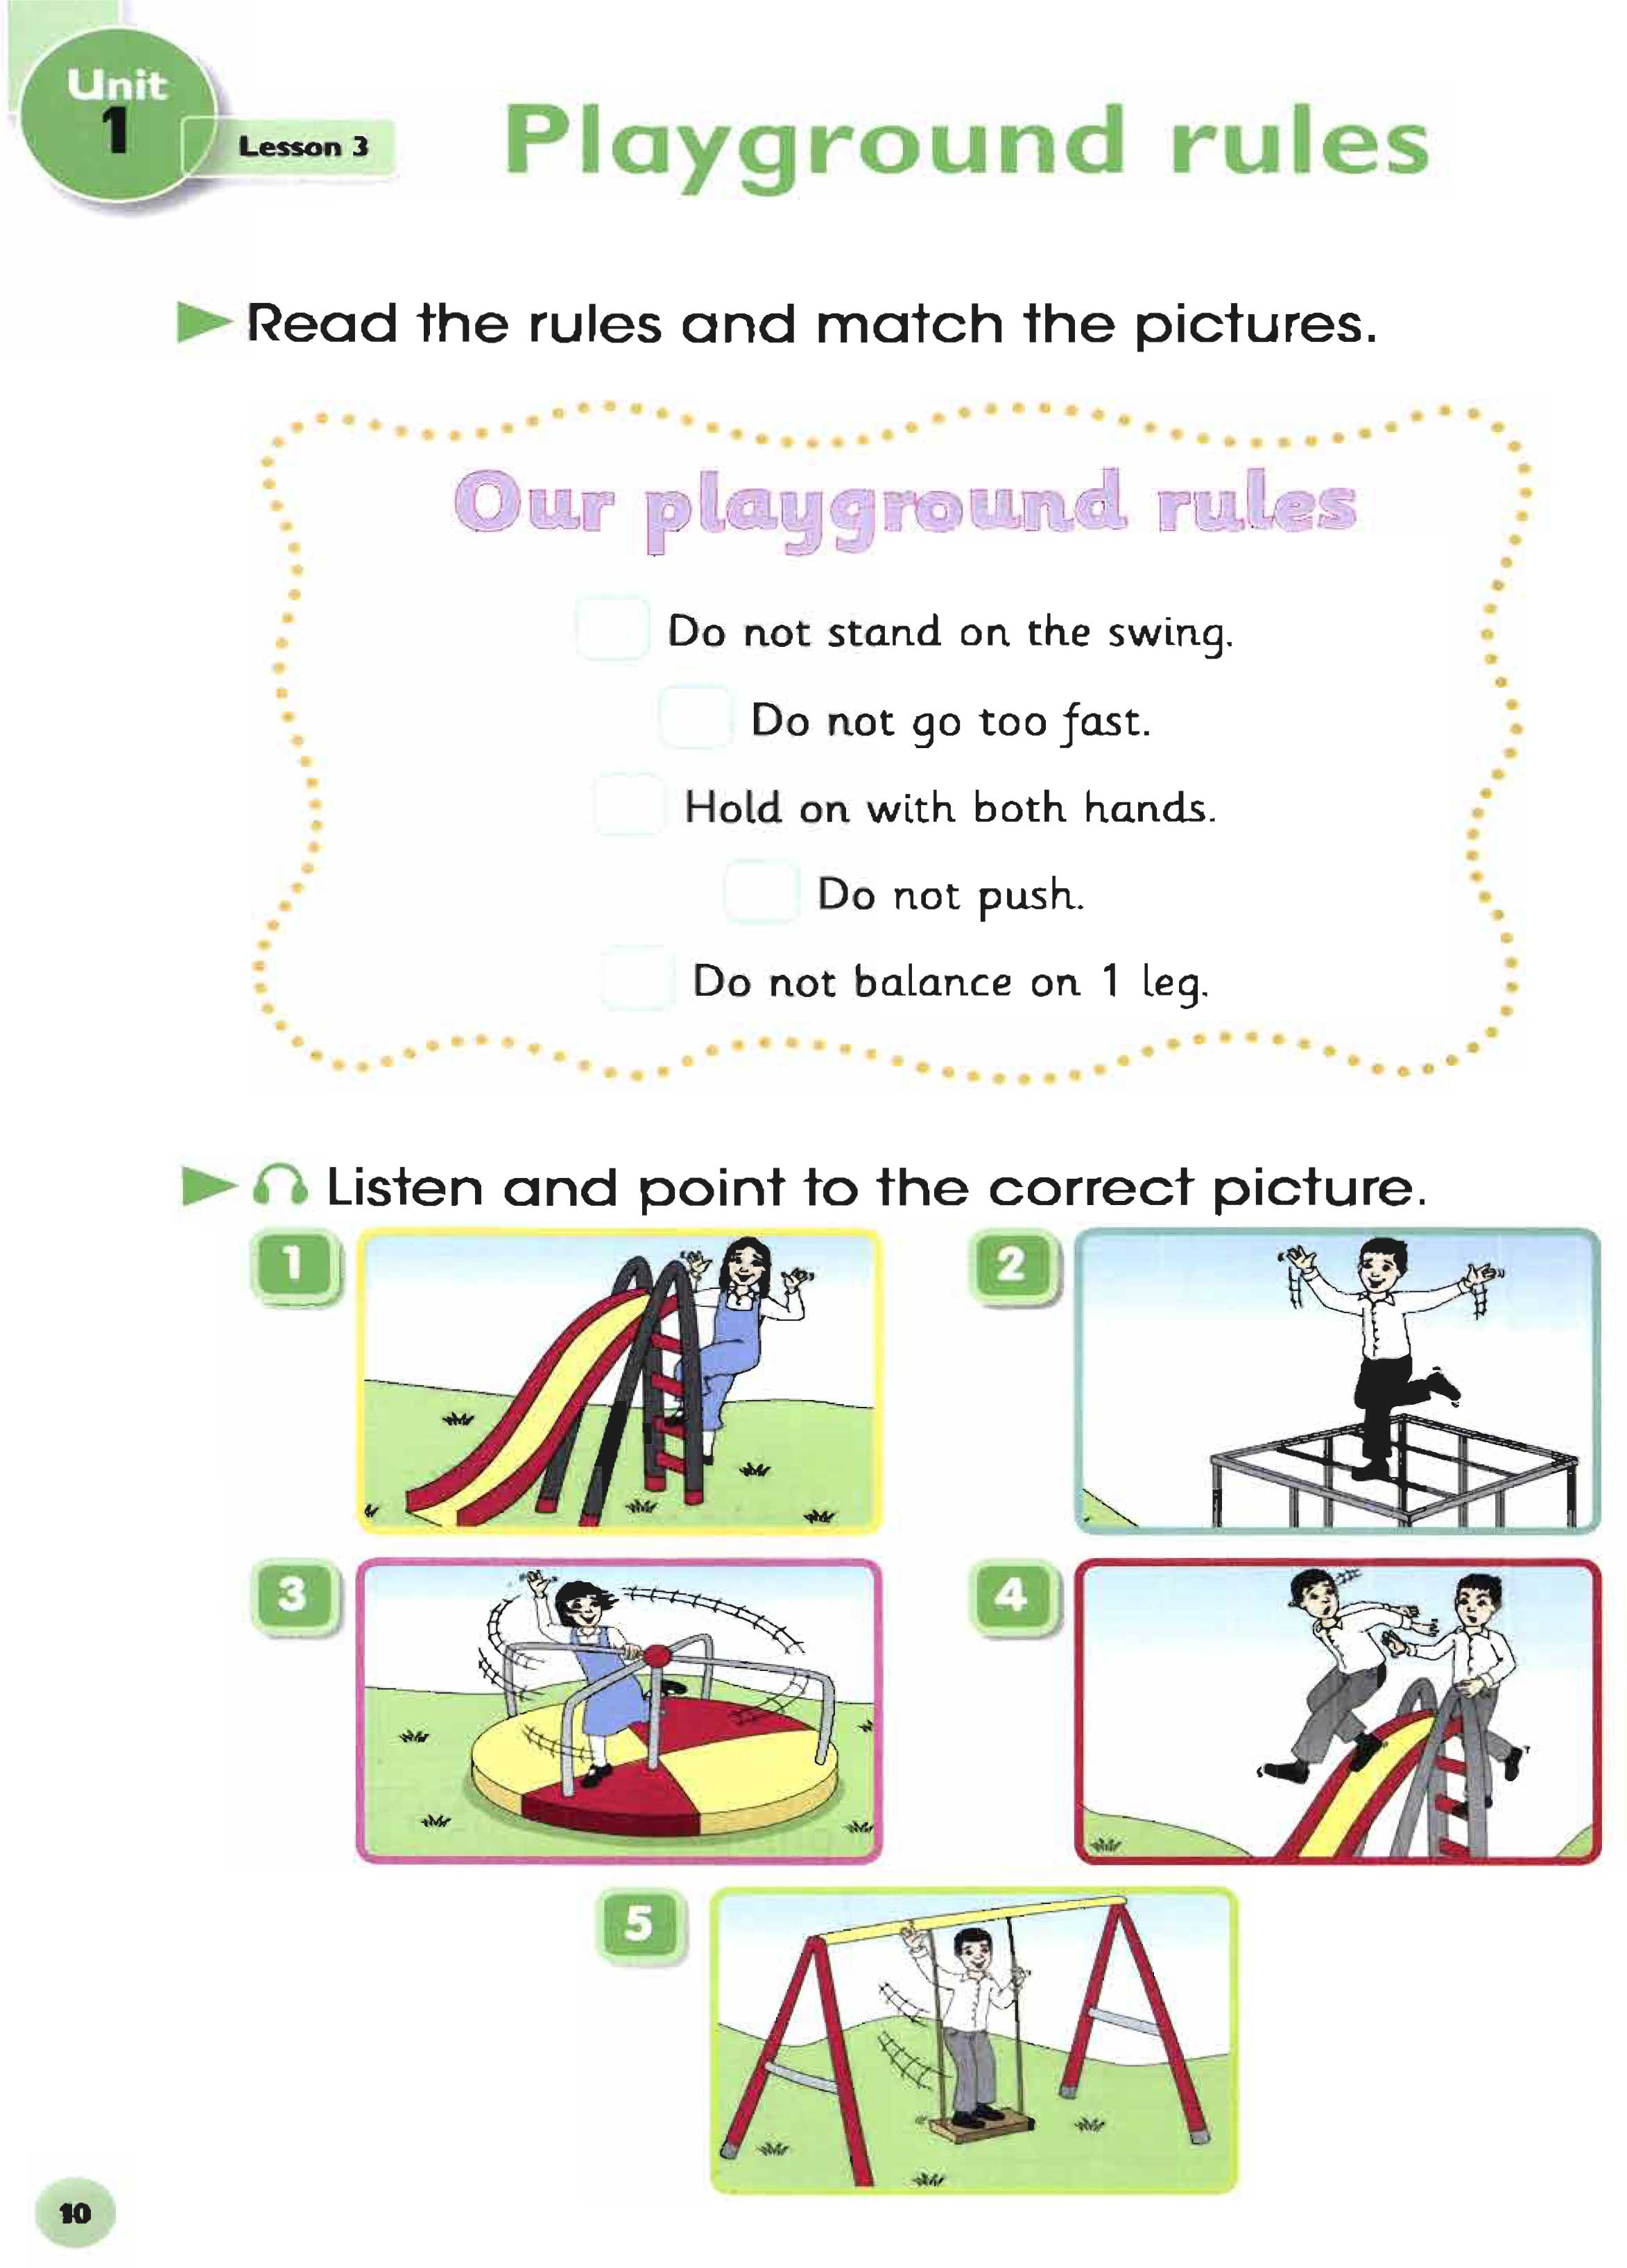 Lesson3:Playground rules